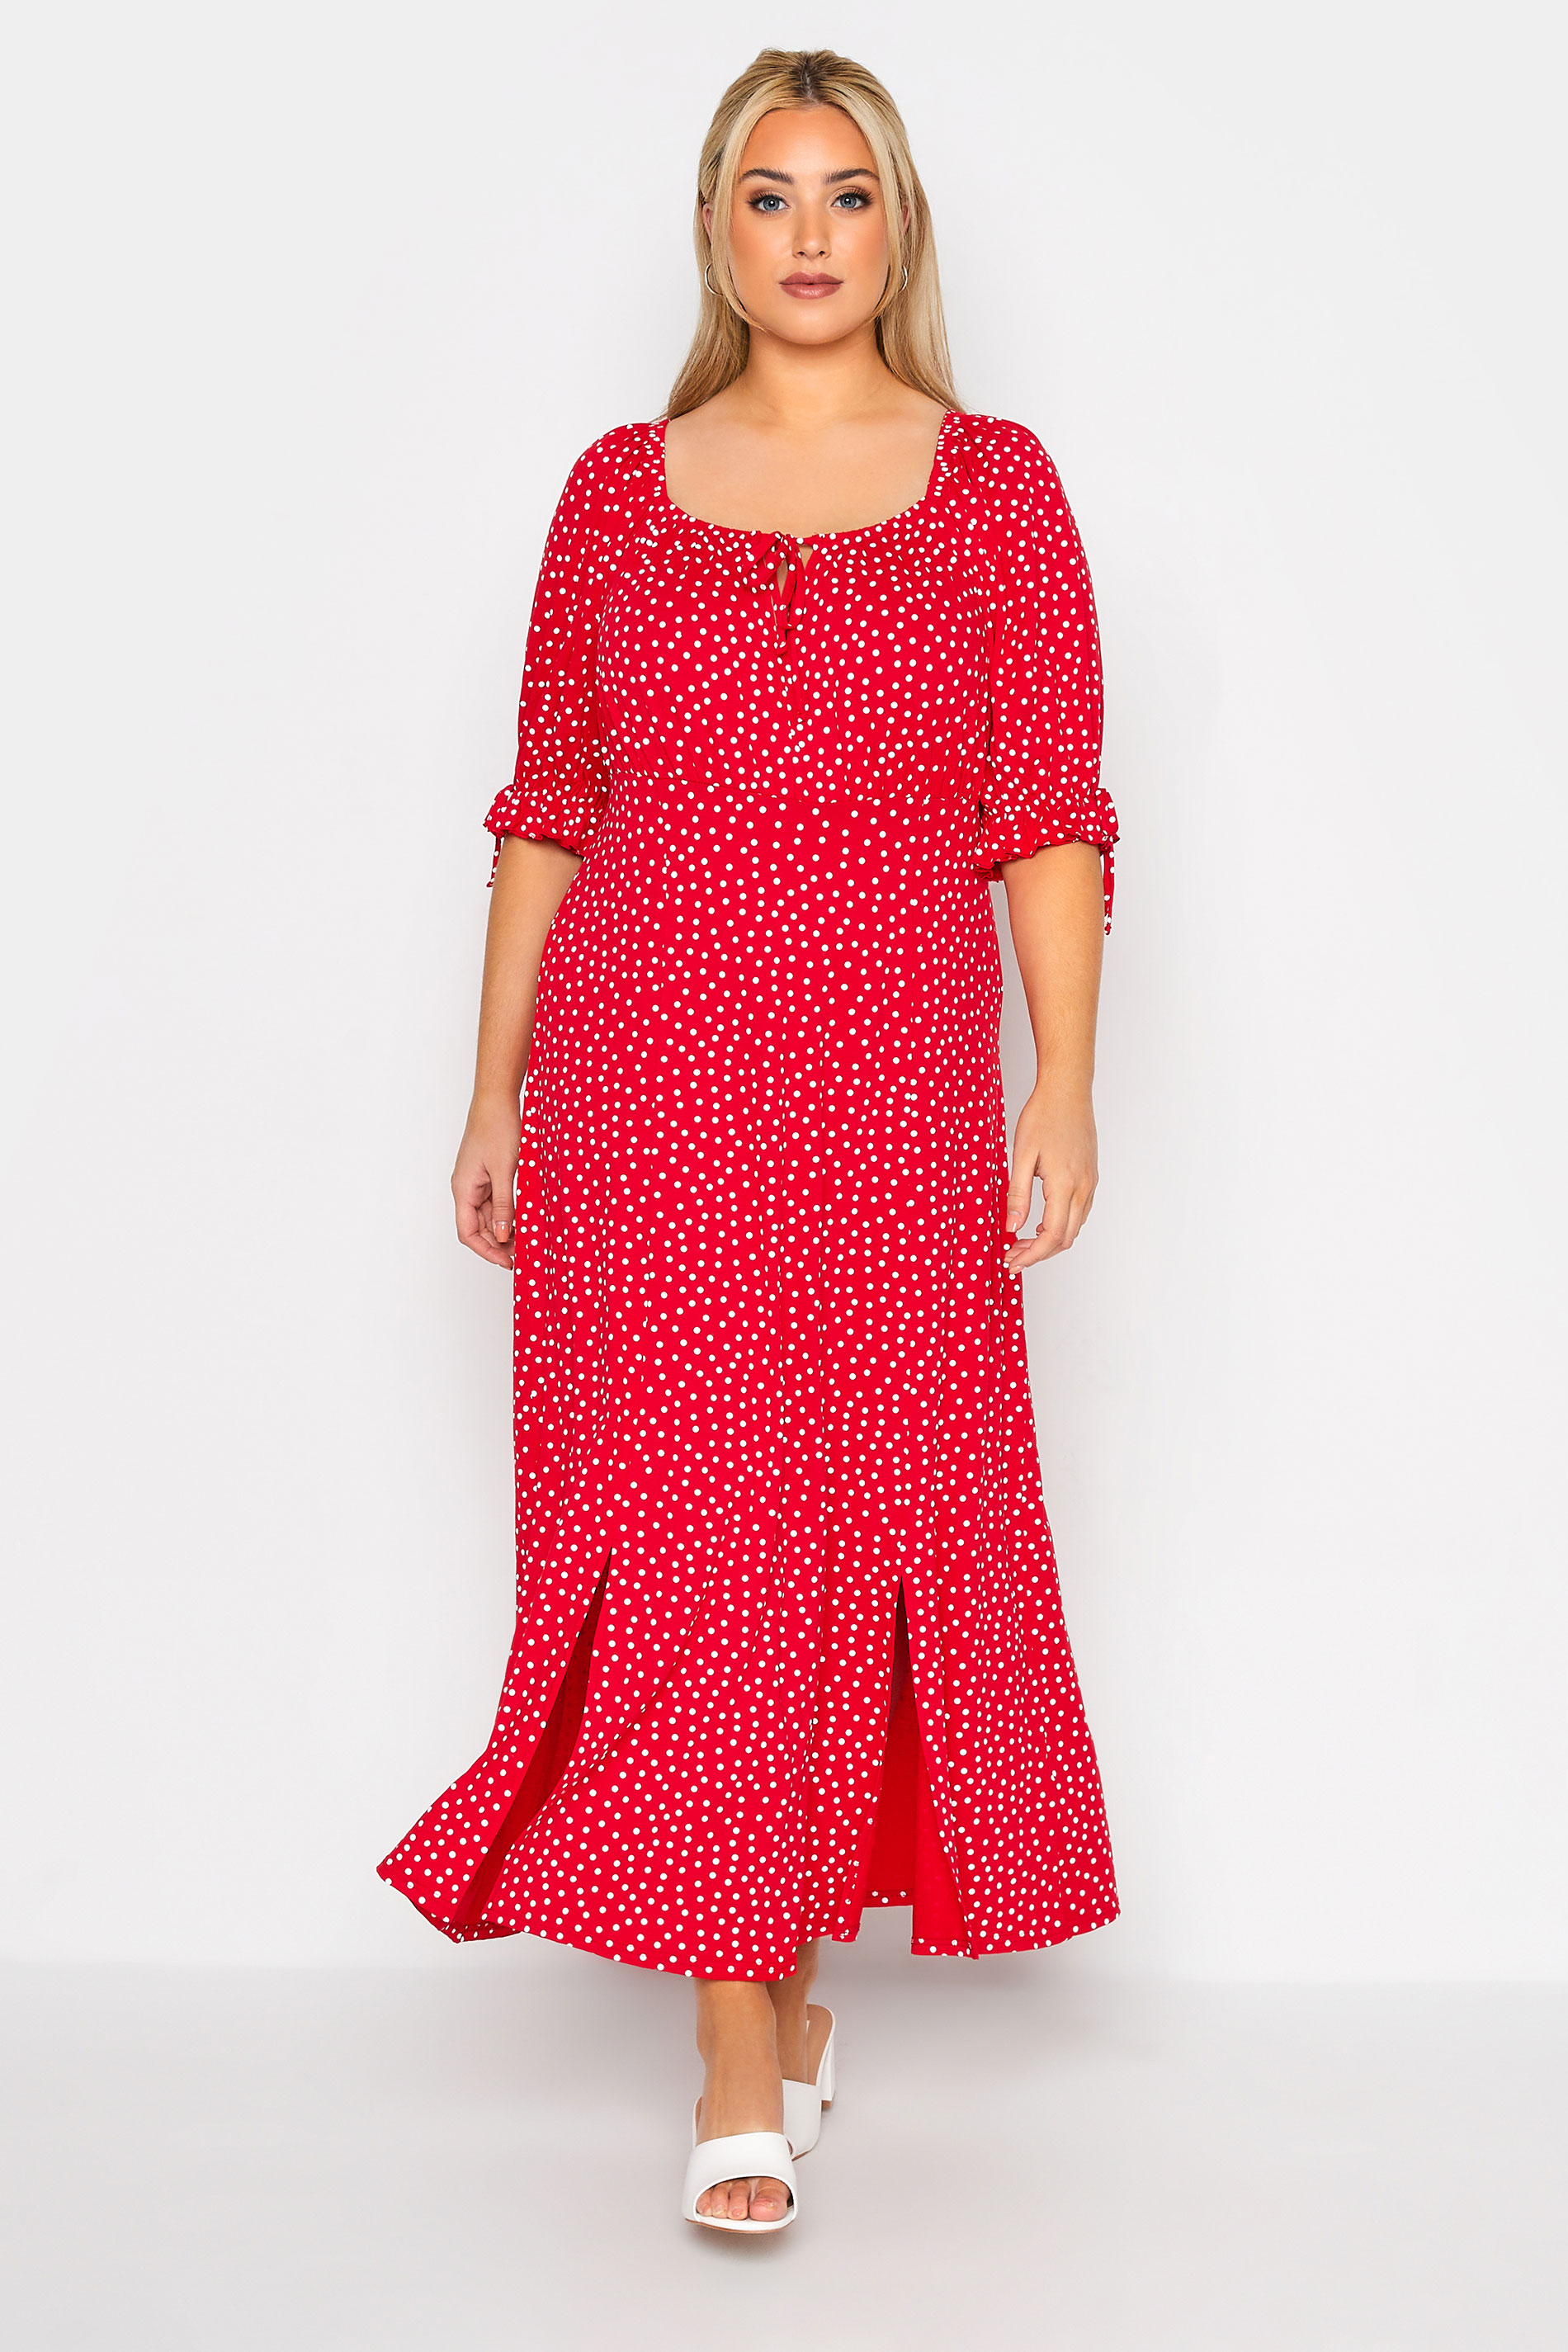 Robes Grande Taille Grande taille  Robes Longues | LIMITED COLLECTION - Robe Rouge Maxi Style Milkmaid à Pois - DX86067